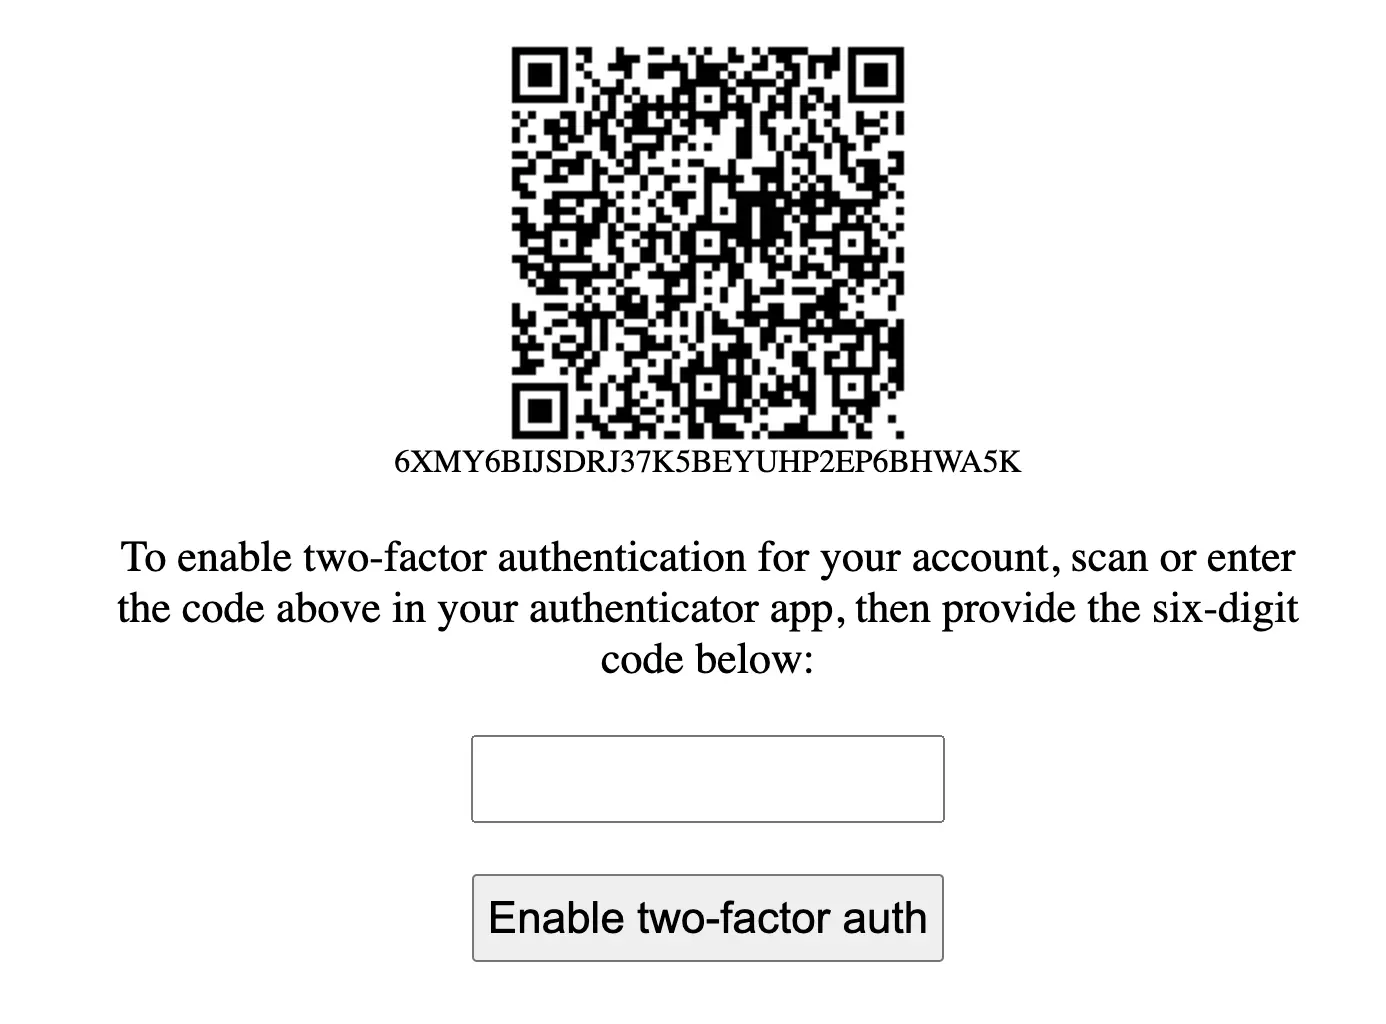 An image containing a QR code used to enable two-factor authentiation for your account.